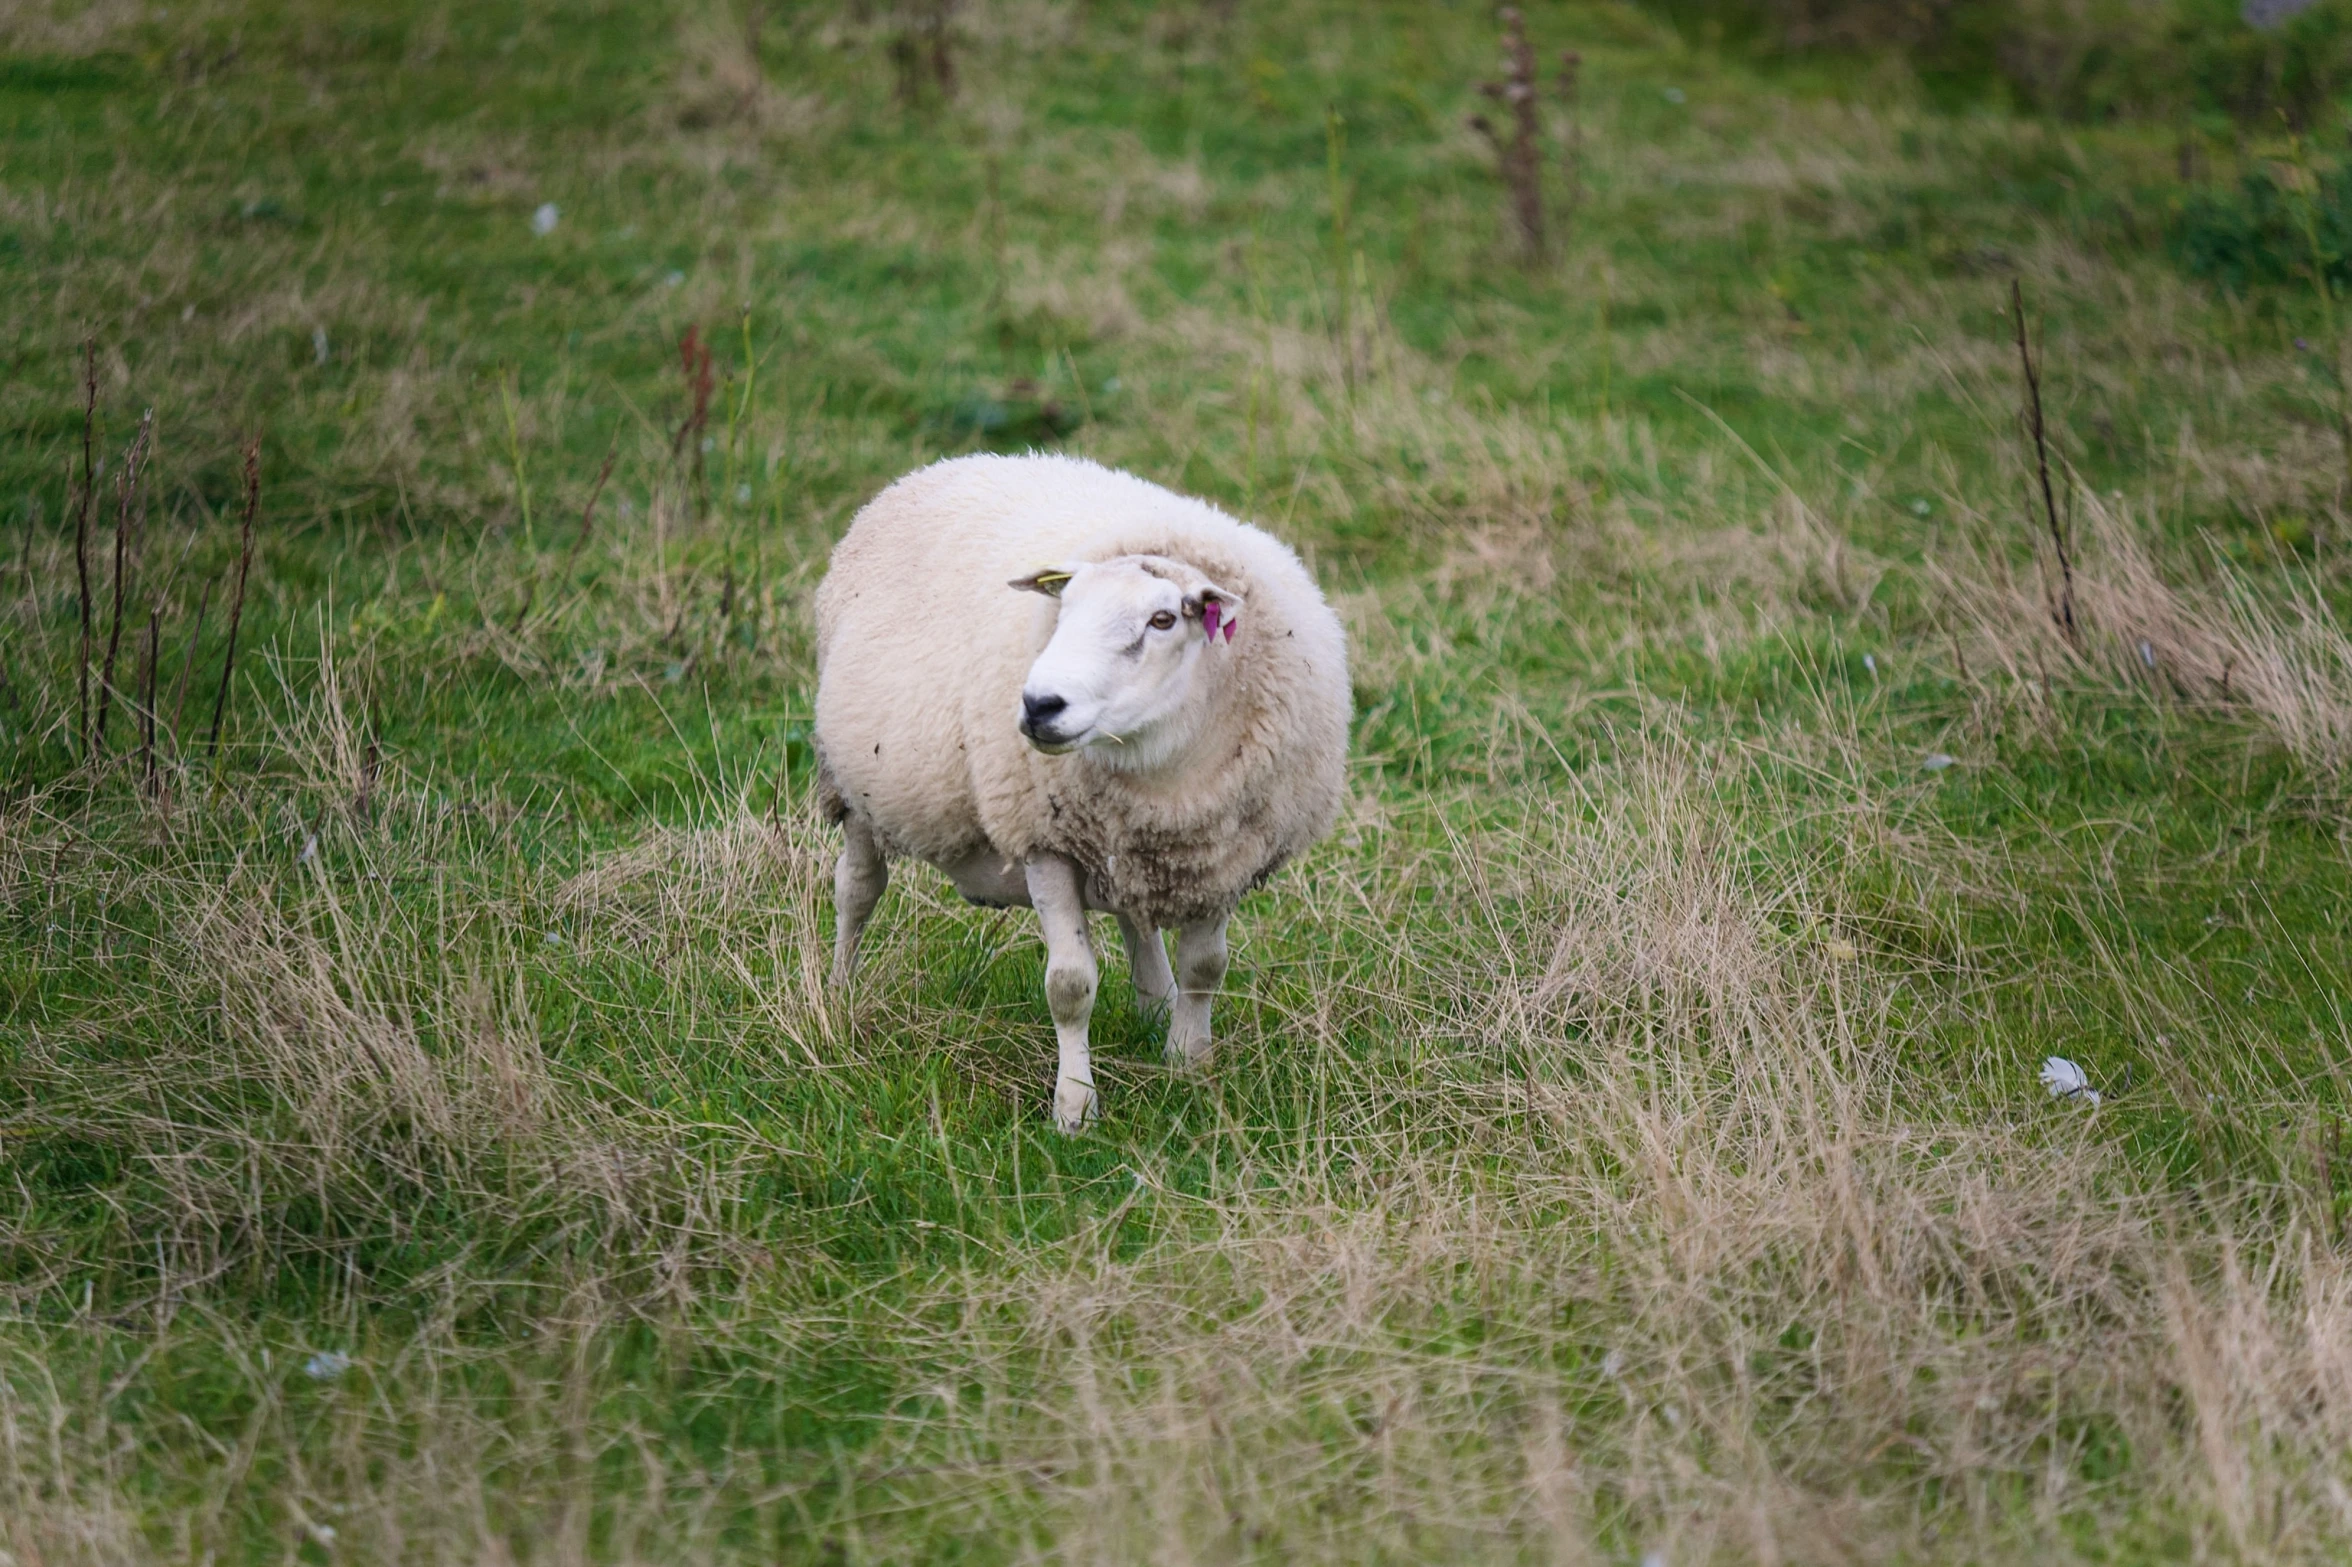 a sheep is standing alone in a field